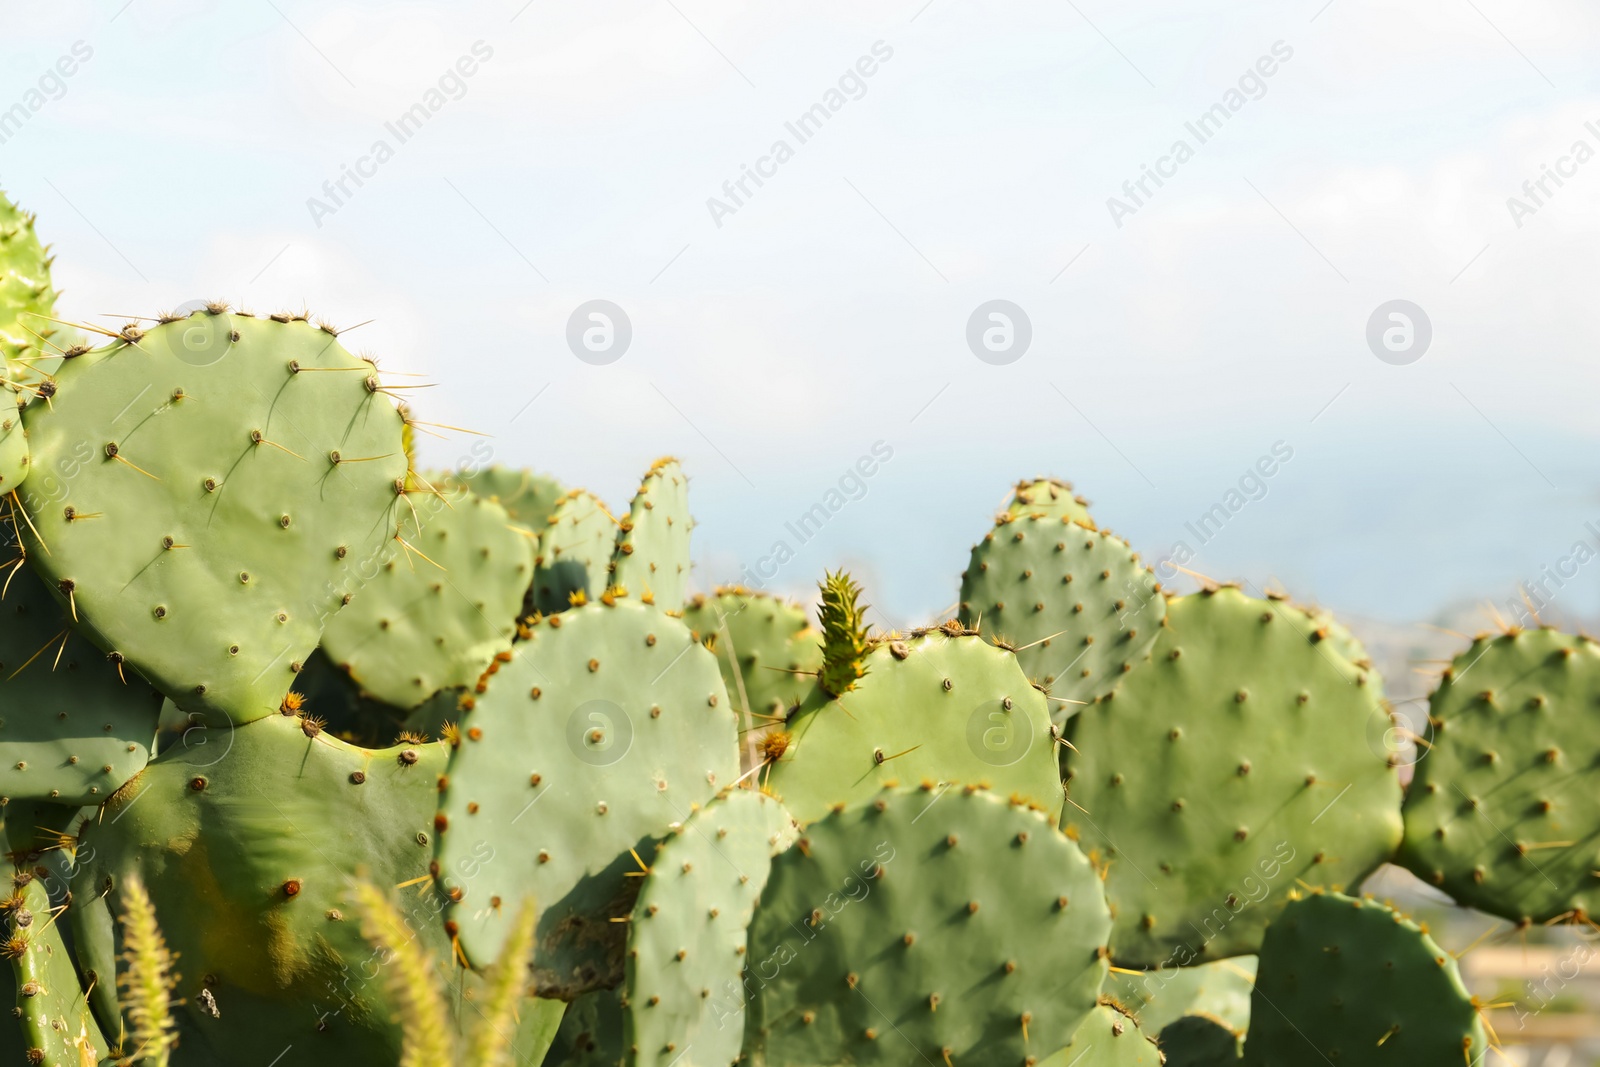 Photo of Beautiful view of cactuses with thorns under cloudy sky, closeup